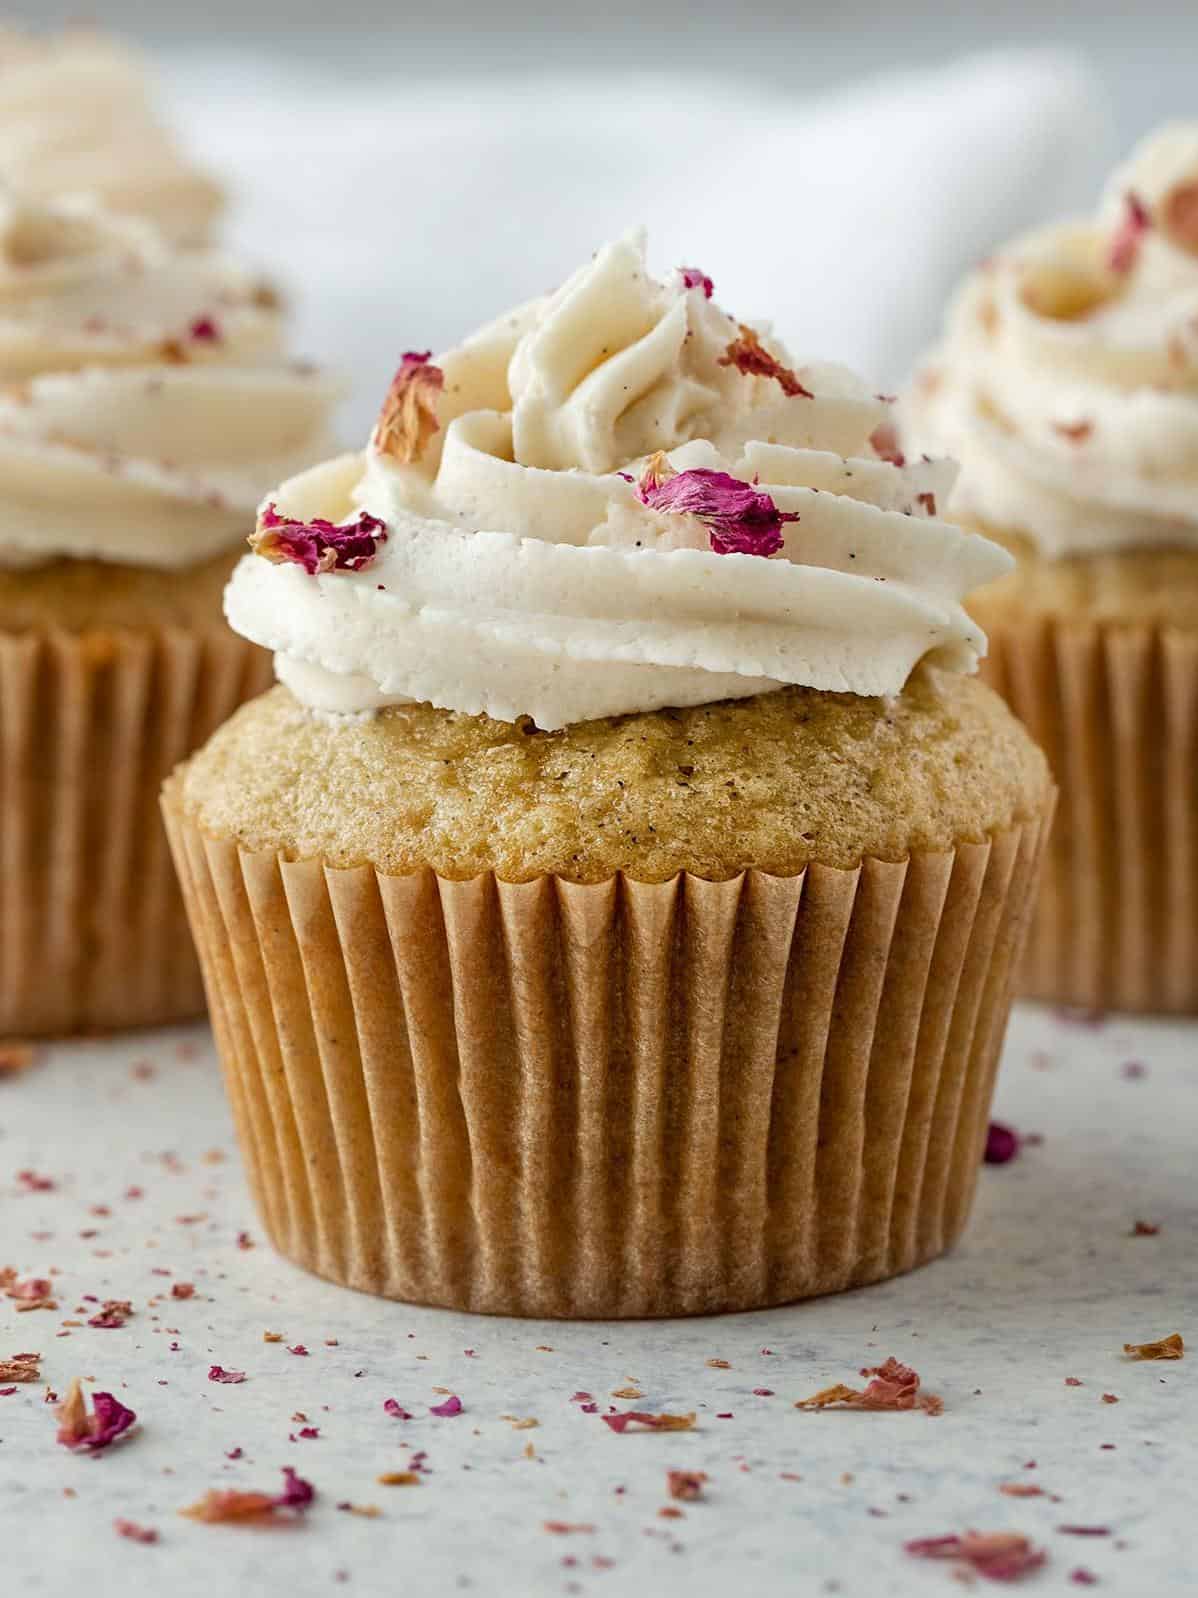  These wild rose petal cupcakes are perfect for any special occasion